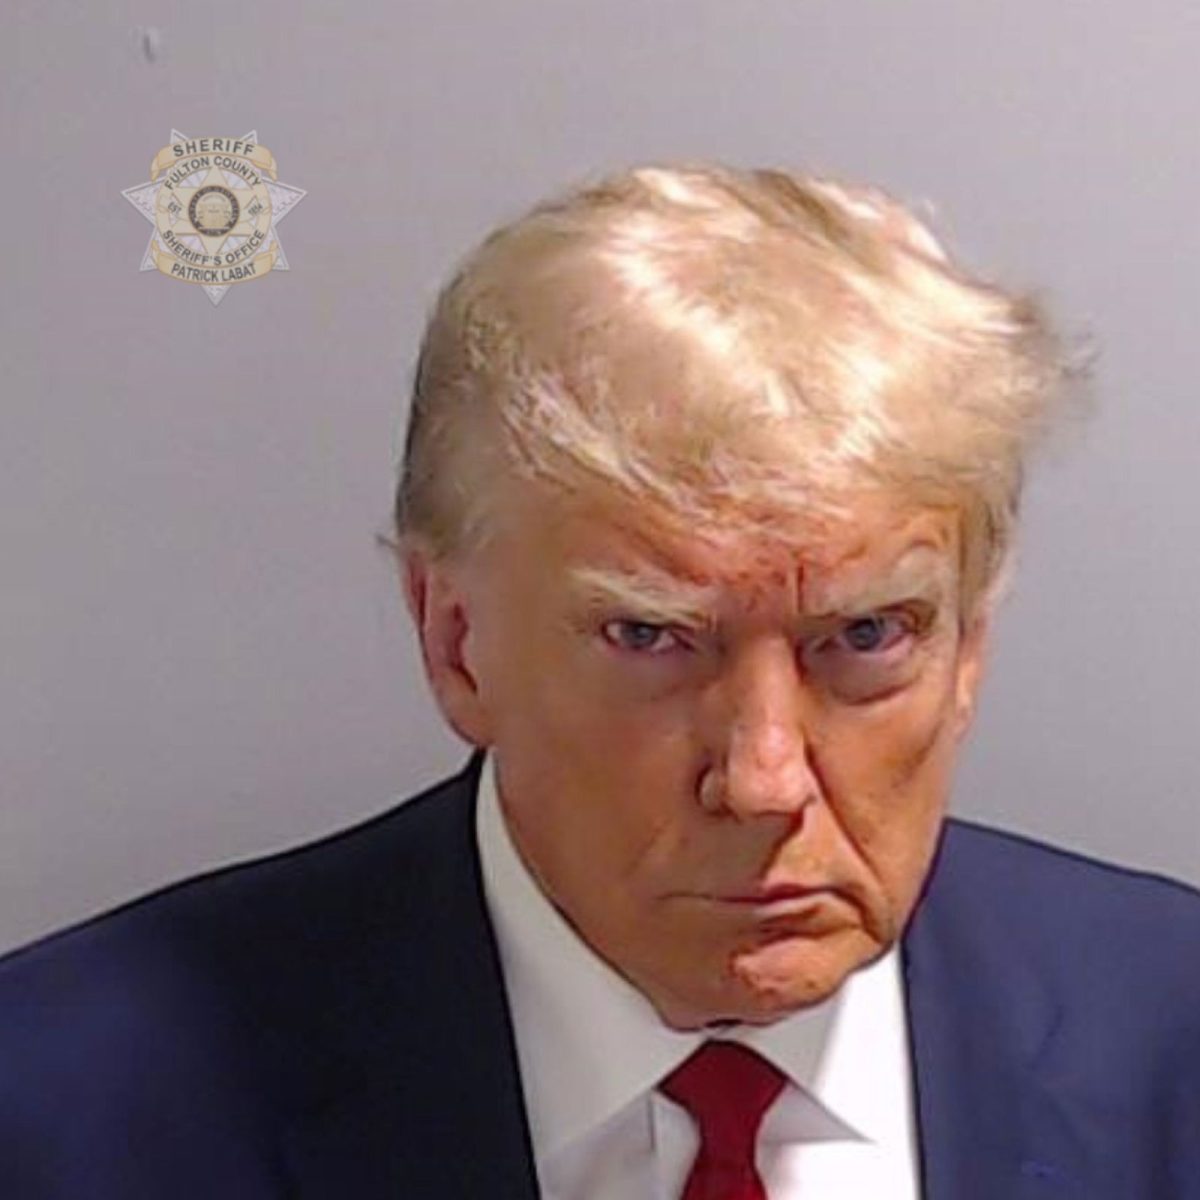 Donald+J.+Trumps+mugshot+taken+on+Thursday%2C+August+24%2C+after+he+surrendered+to+the+authorities+at+Fulton+County+Jail.+